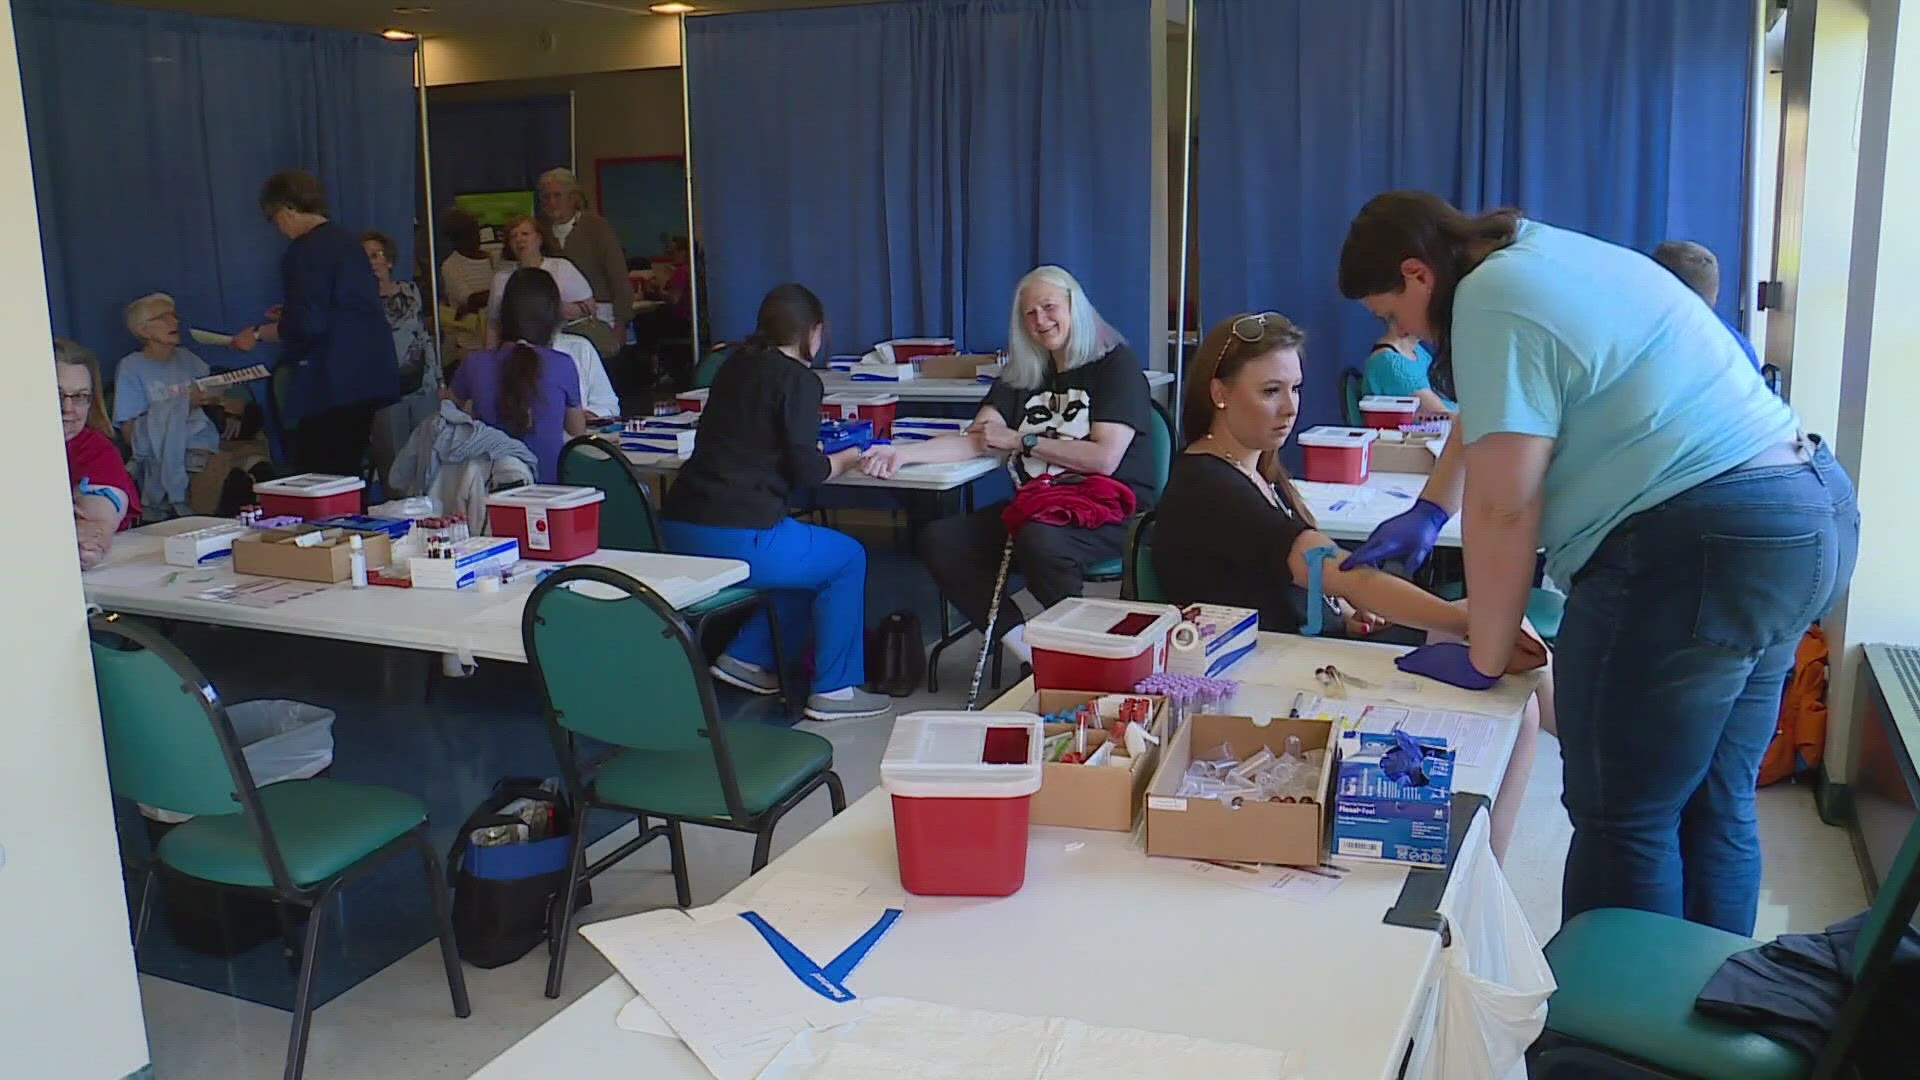 The health fairs offer a way for Colorado residents to get free or low-cost blood and other preventative screenings.